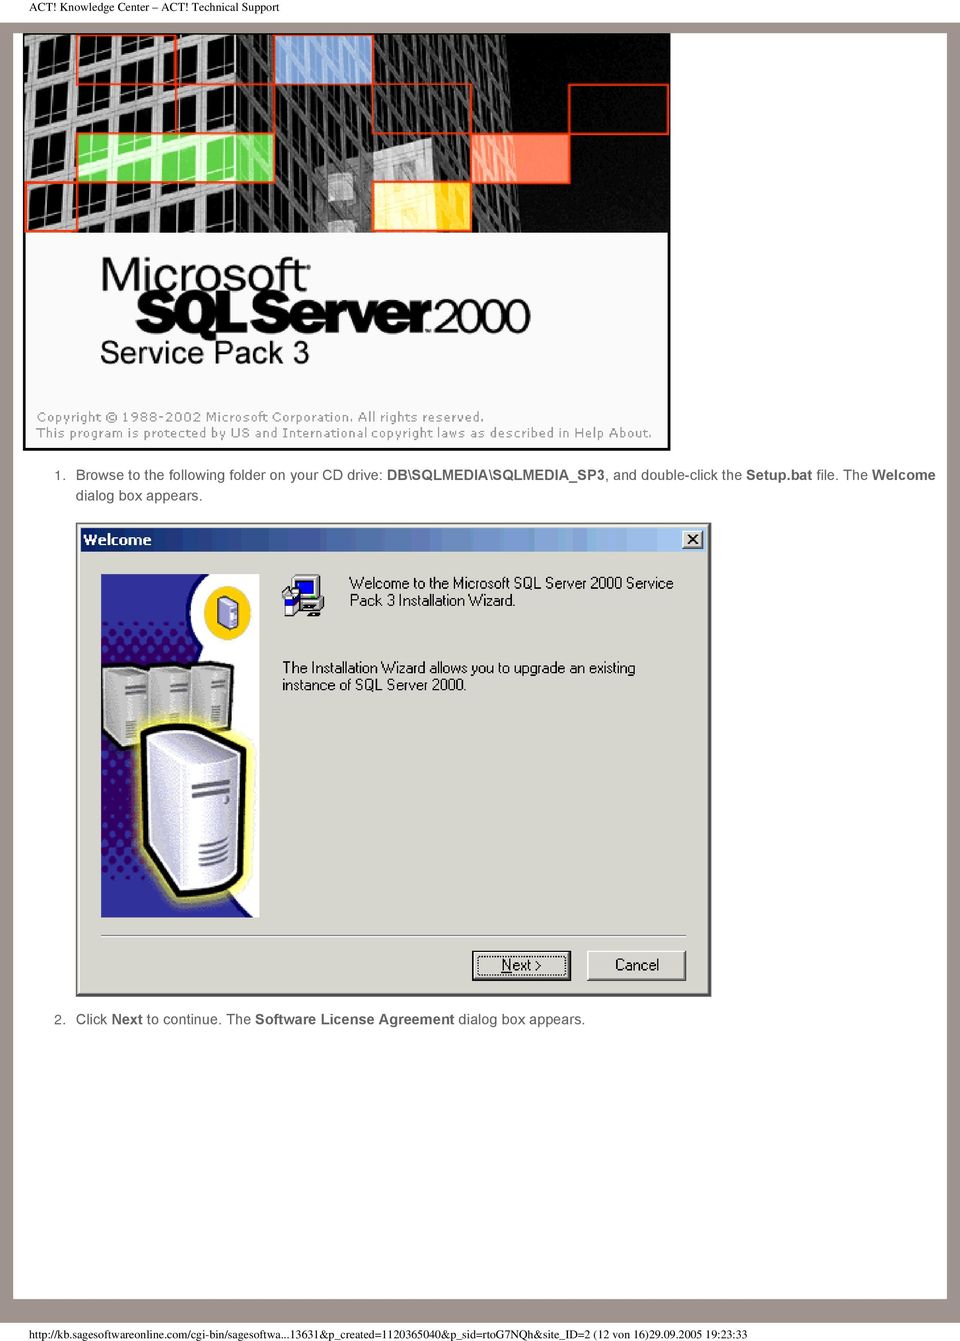 The Software License Agreement dialog box appears. http://kb.sagesoftwareonline.